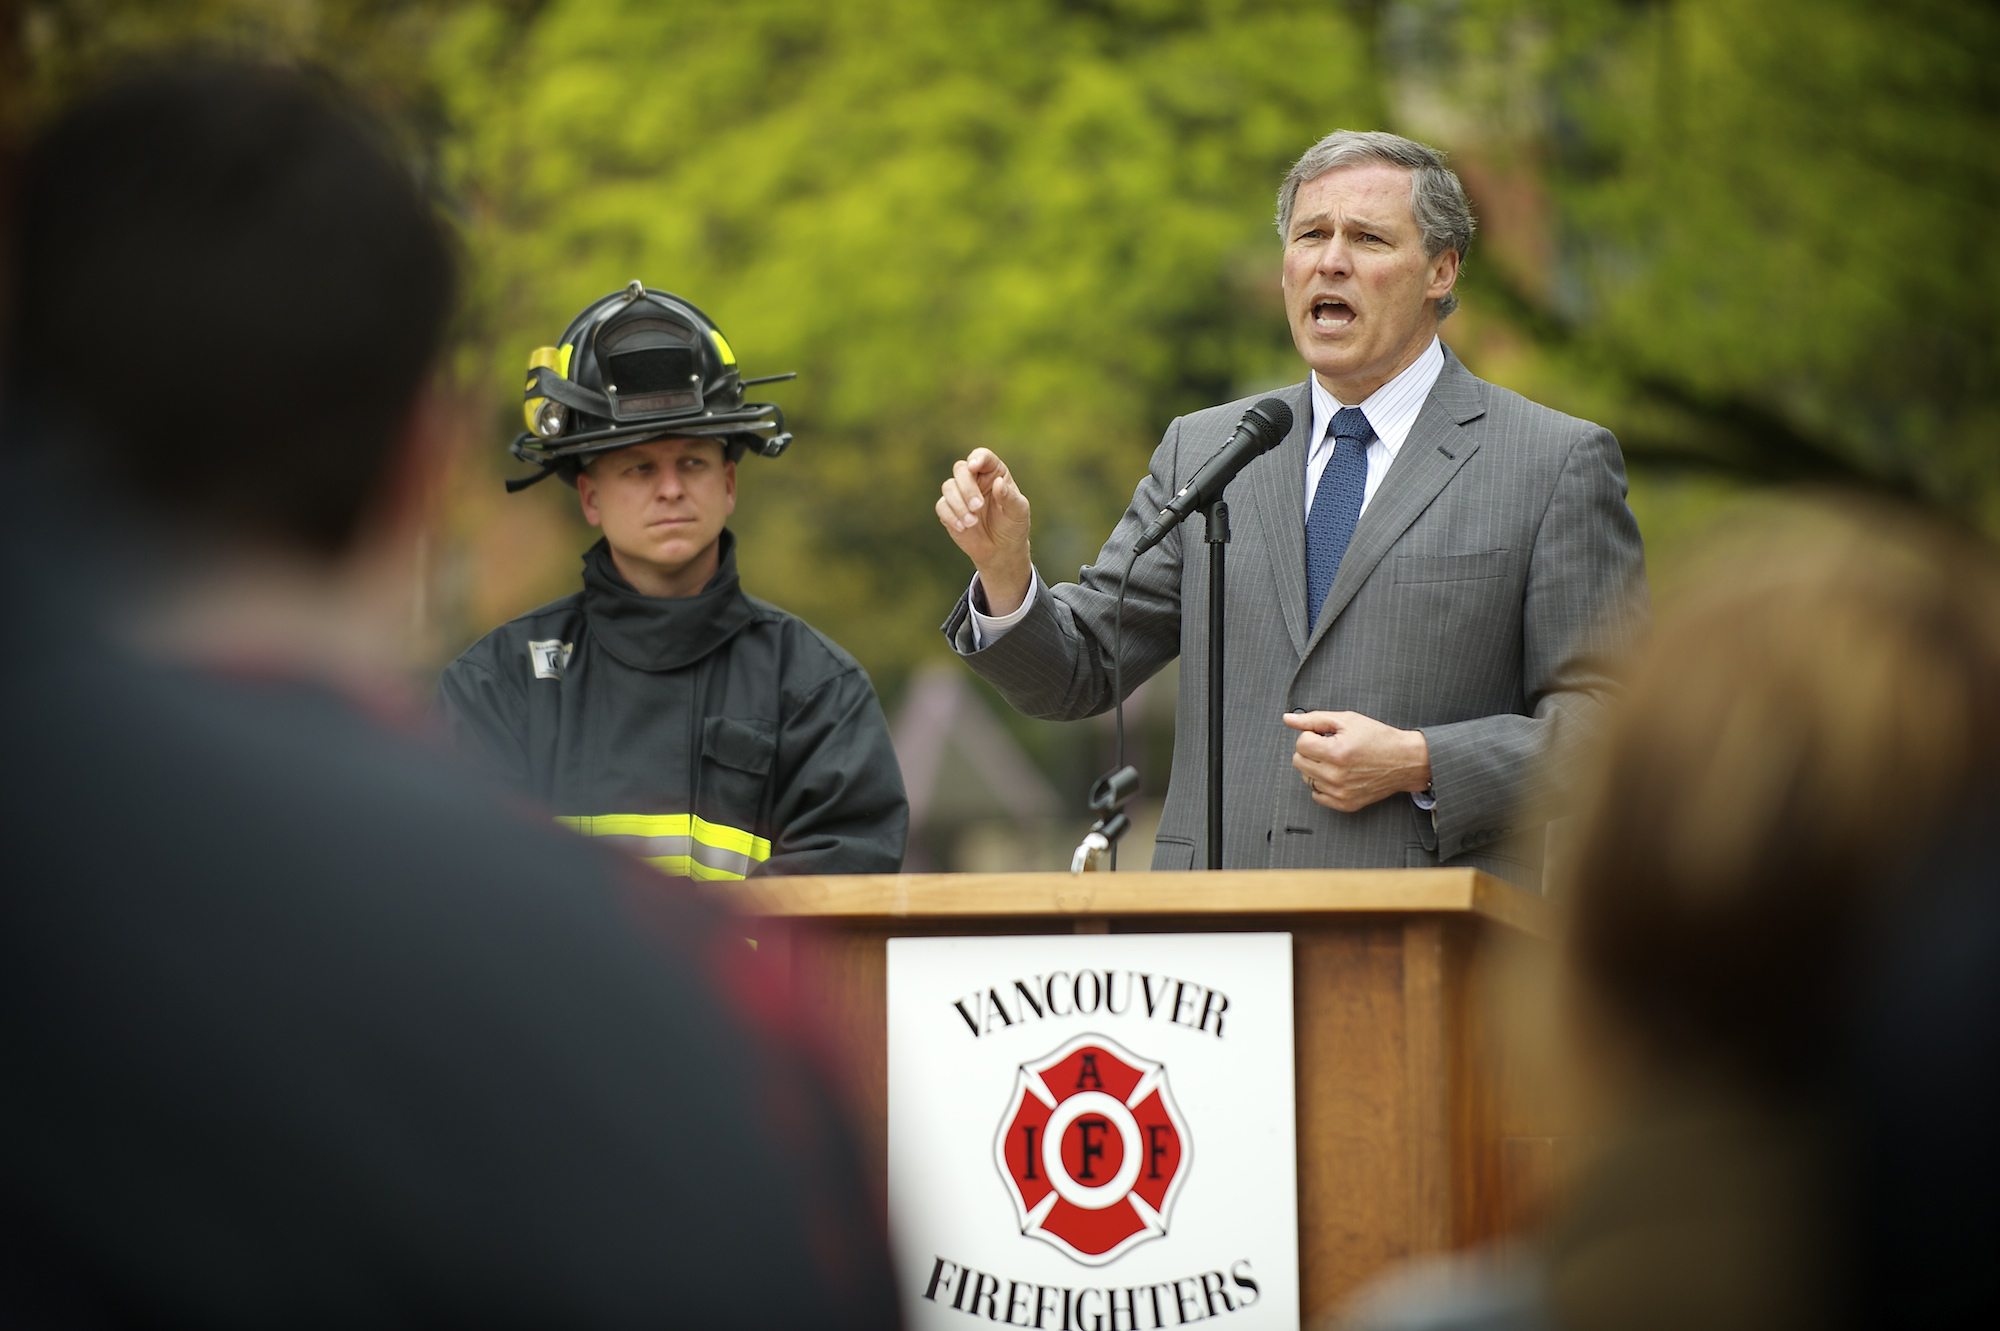 Democratic gubernatorial candidate Jay Inslee speaks to firefighters and firefighter representatives at a rally for the Inslee campaign on Tuesday at Esther Short Park in Vancouver.